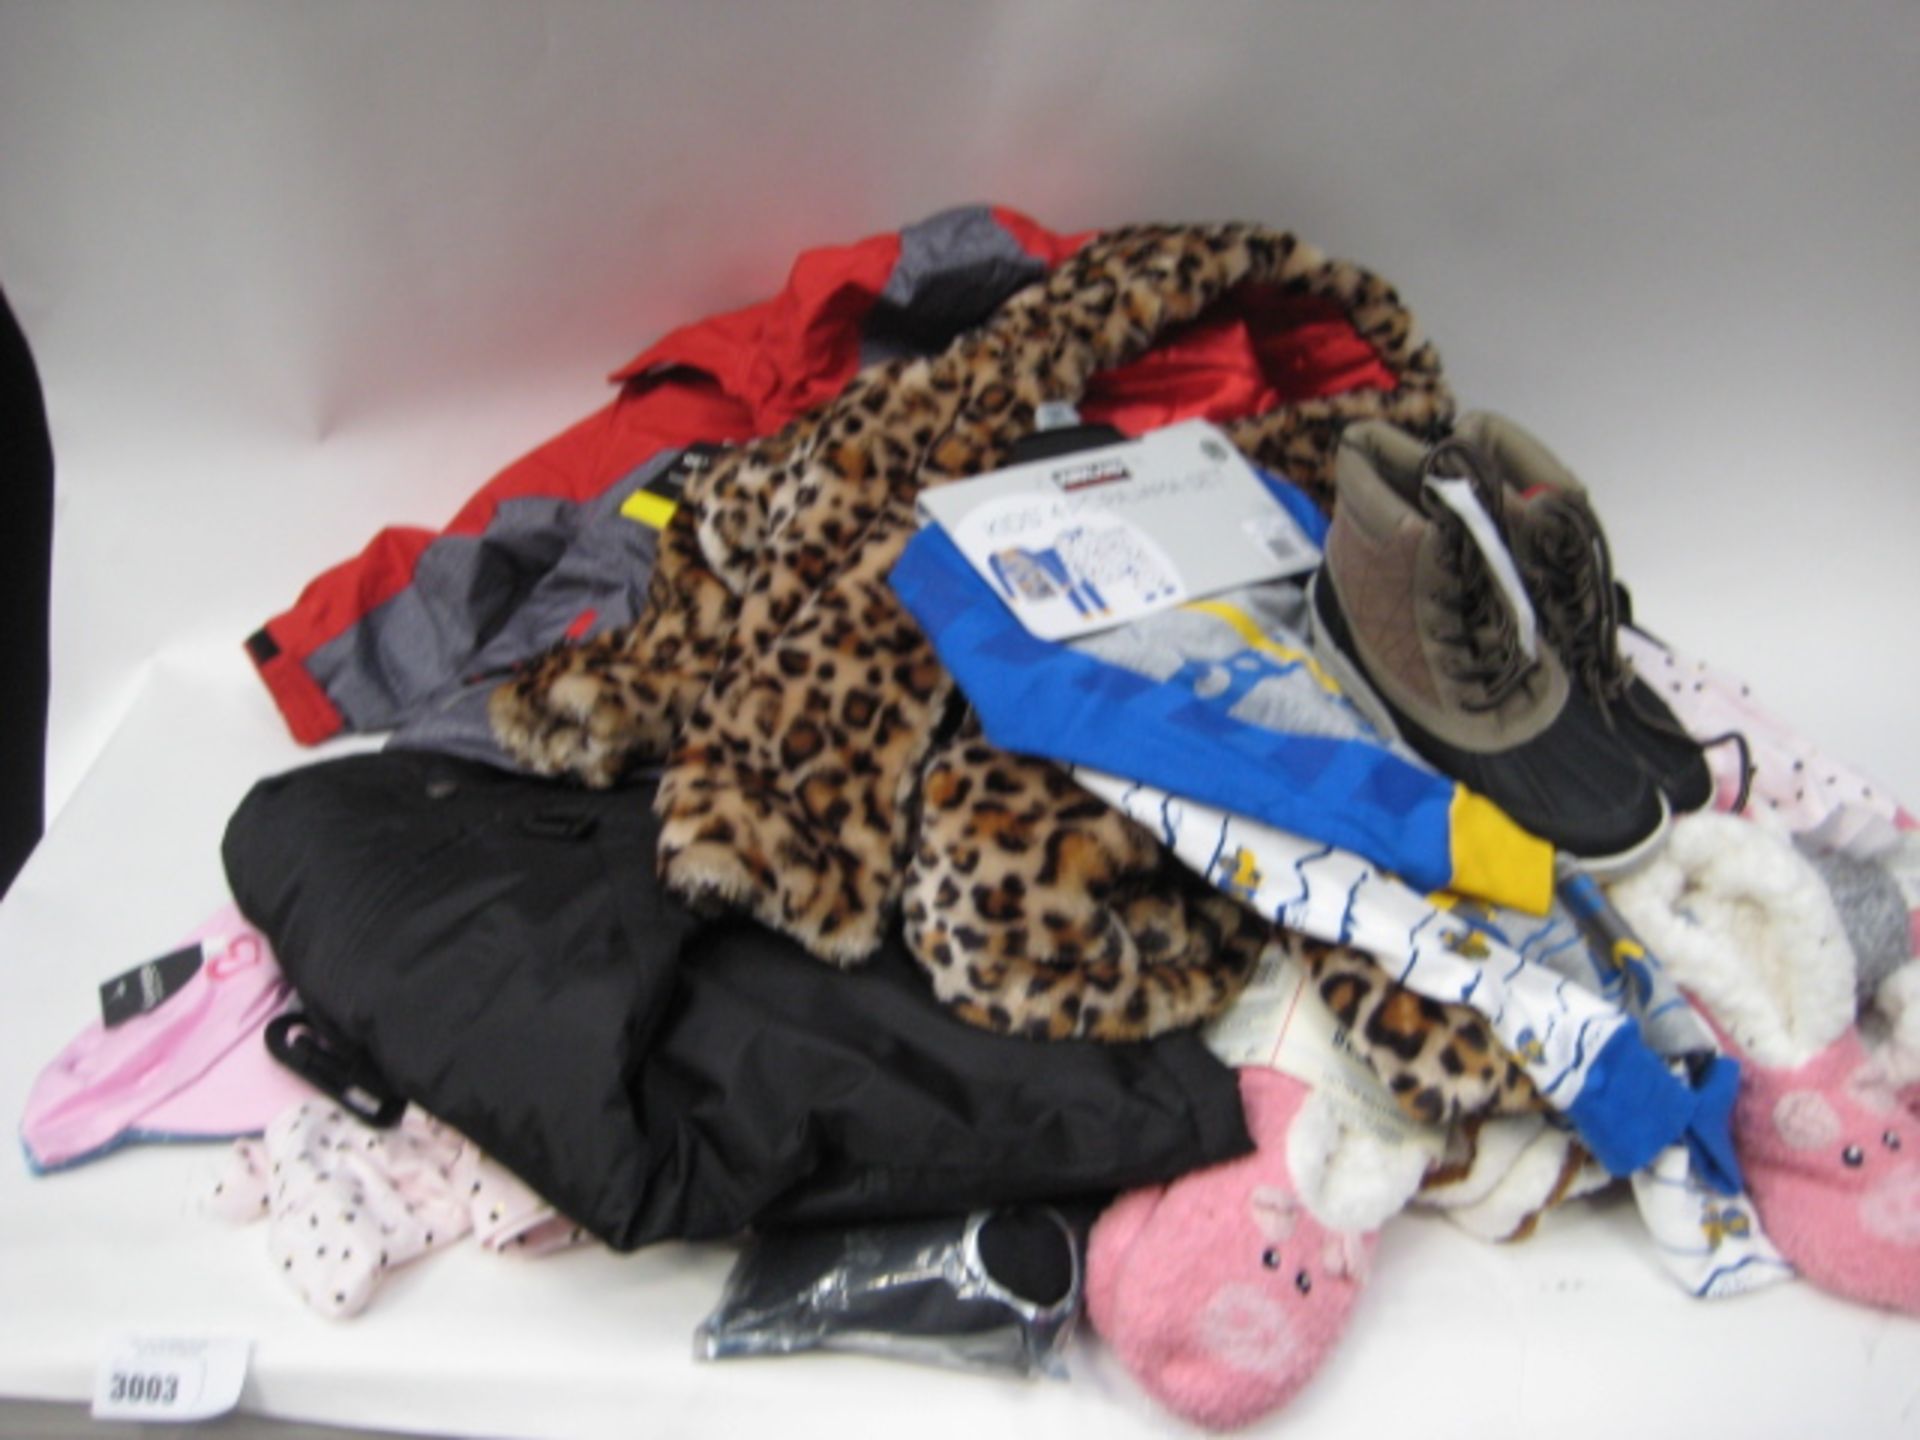 Bag containing childrens clothing to include 2 piece pyjama sets, animal print furry jackets,